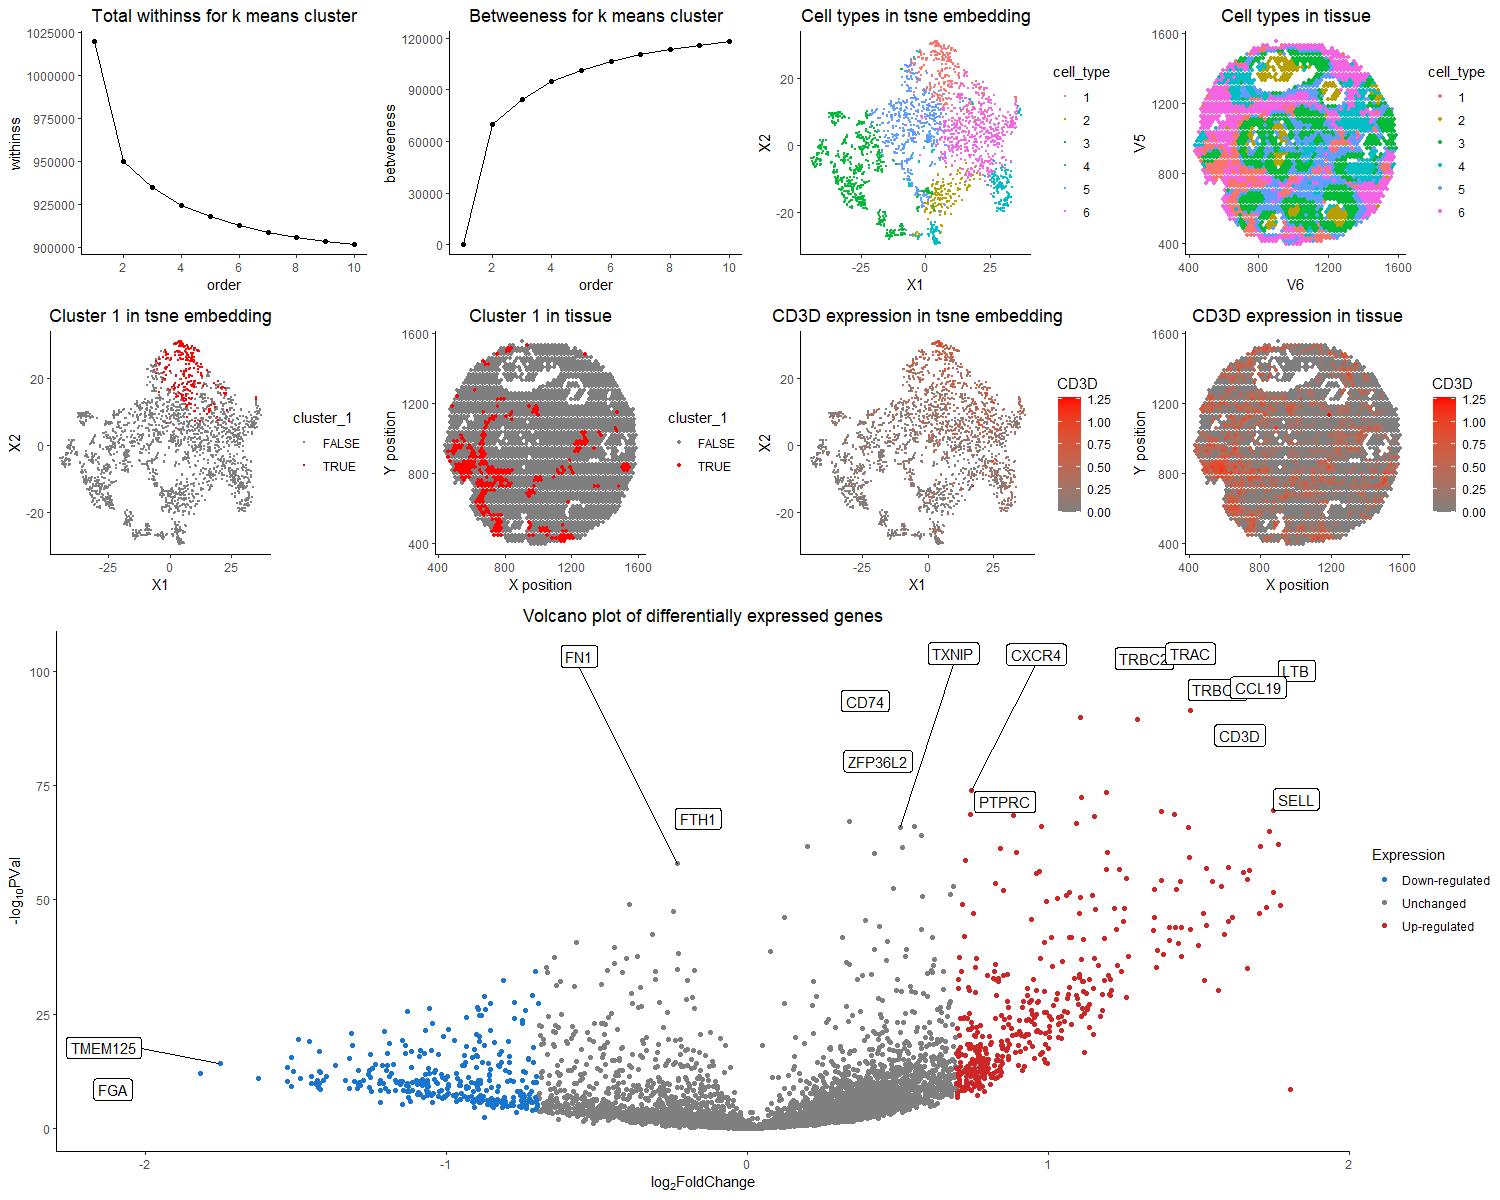 Validation of cell type clustering via differential gene expression